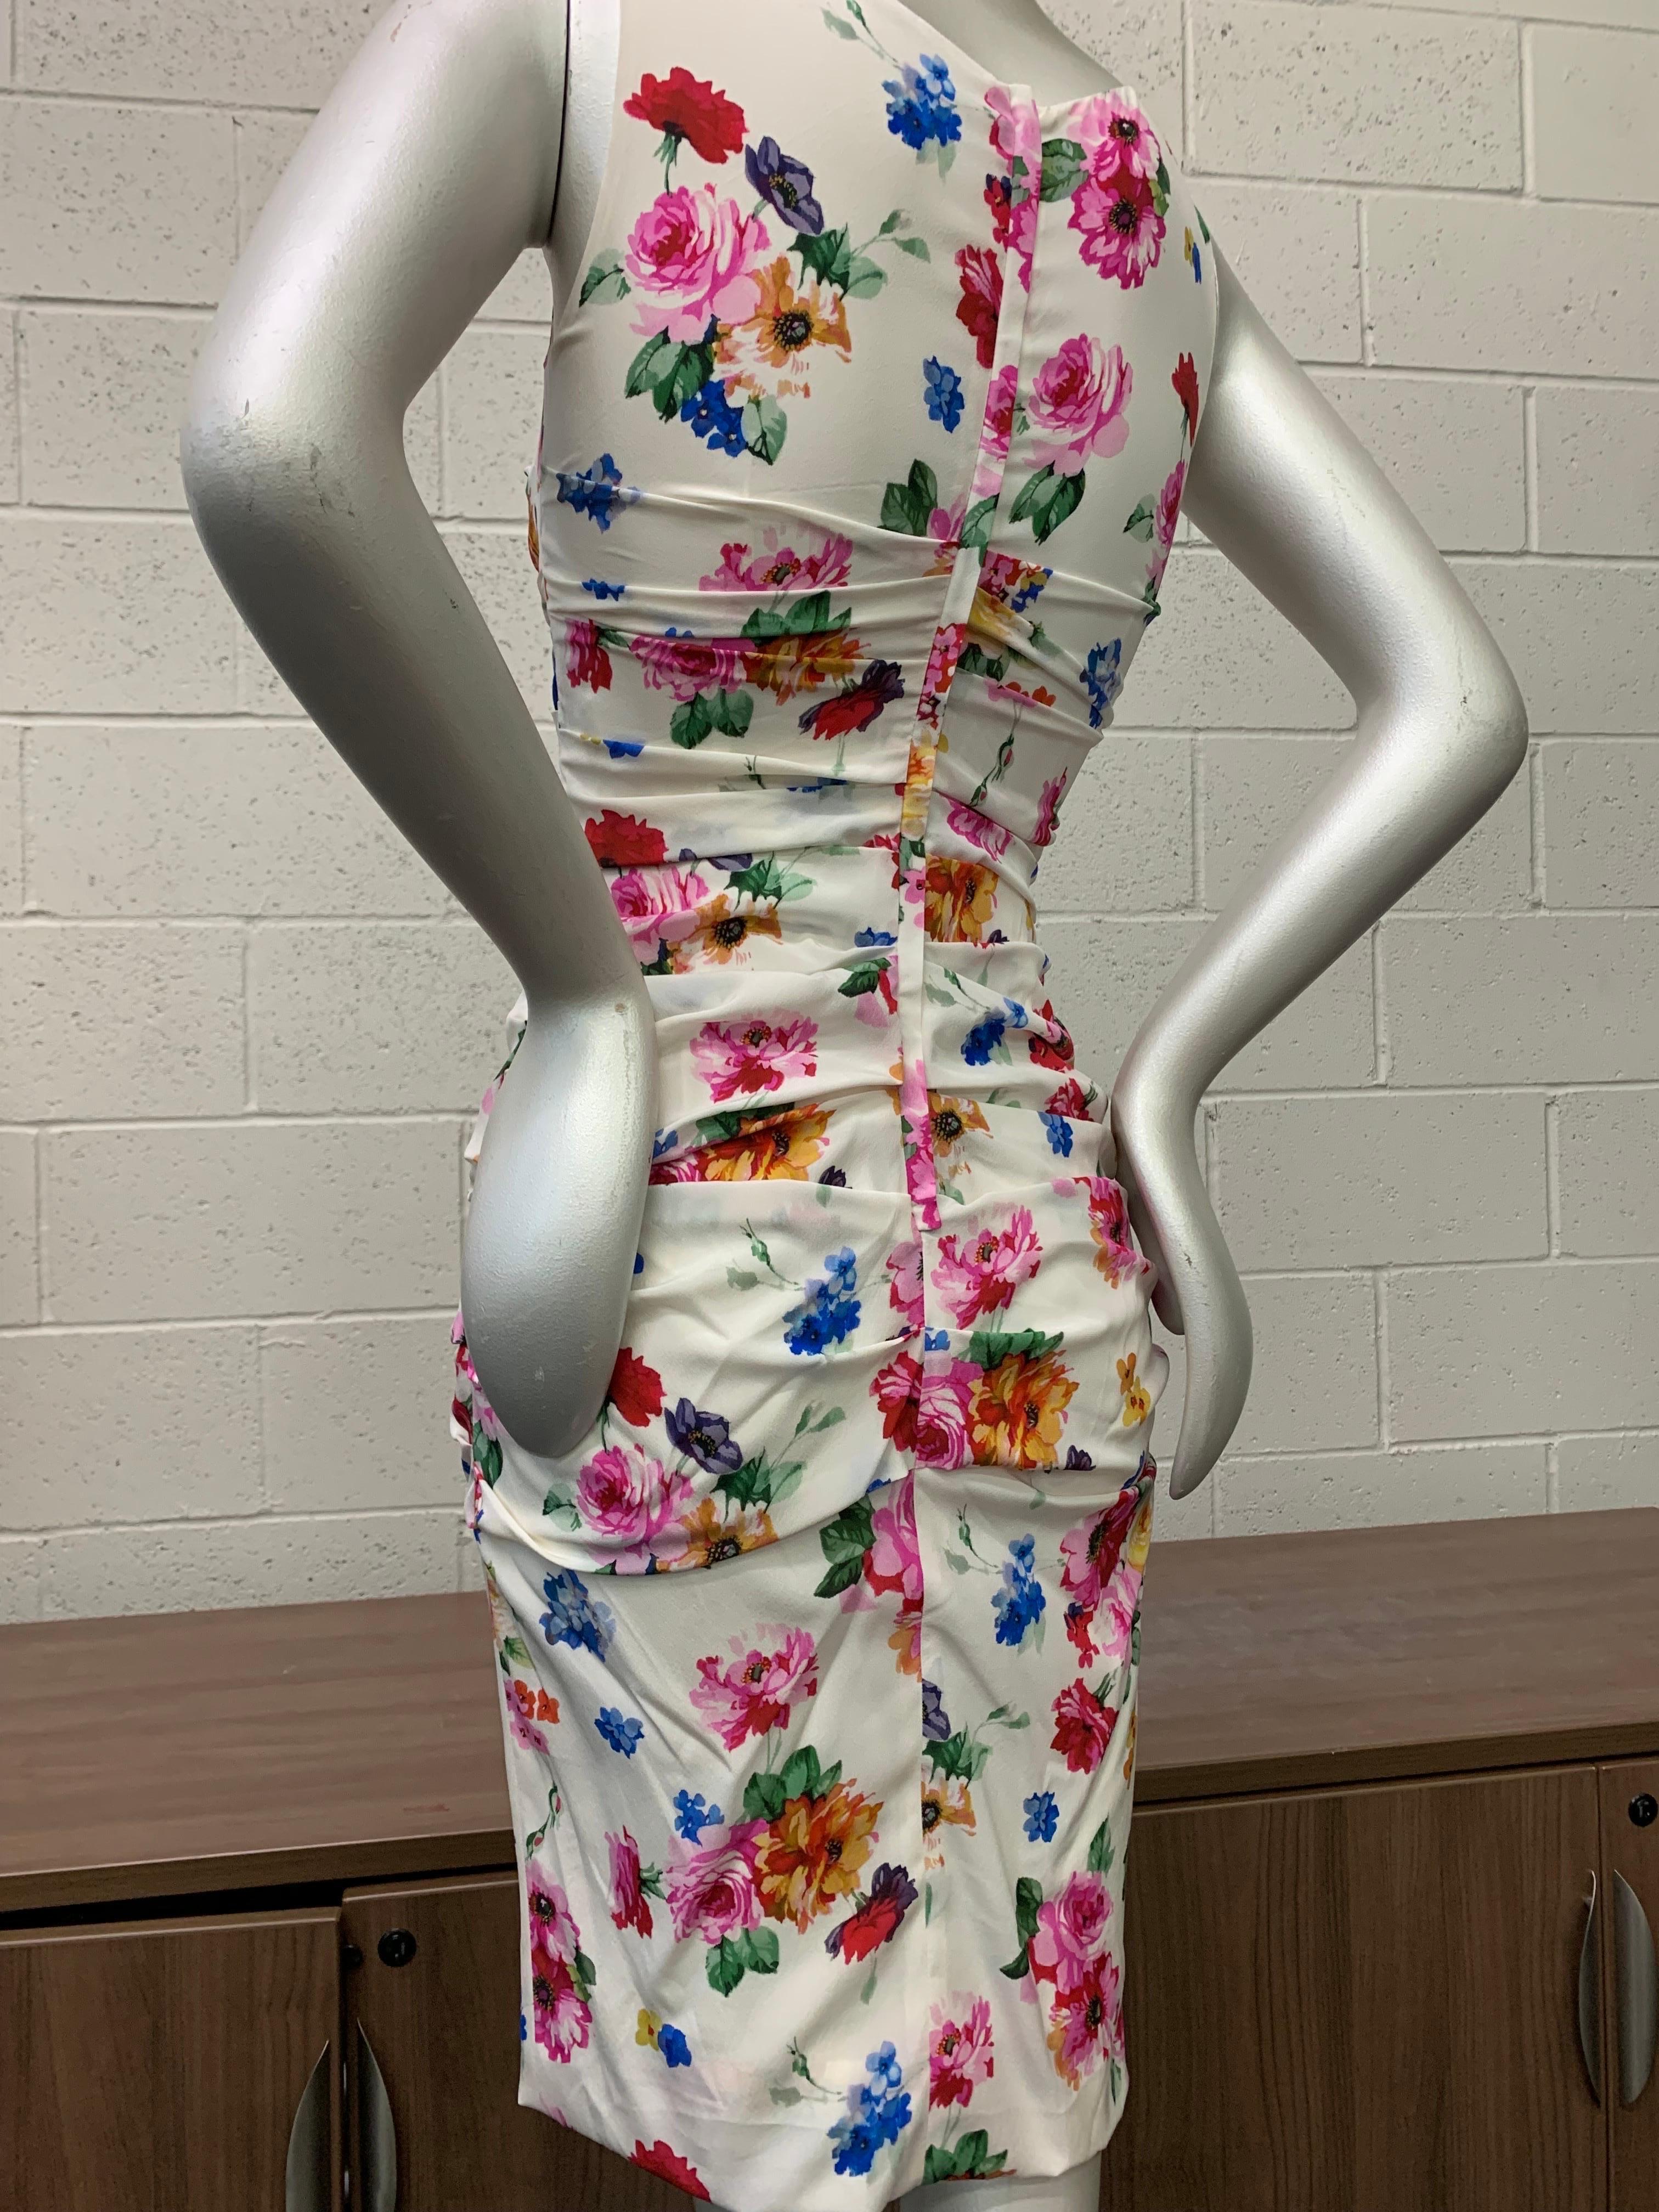 Contemporary Dolce & Gabbana sleeveless stretch silk, floral-print, ruched cocktail sheath in mixed pastels on a white background. Ruching at back of midriff and hips for a great body-conscious fit. New, never worn. Size 42. 